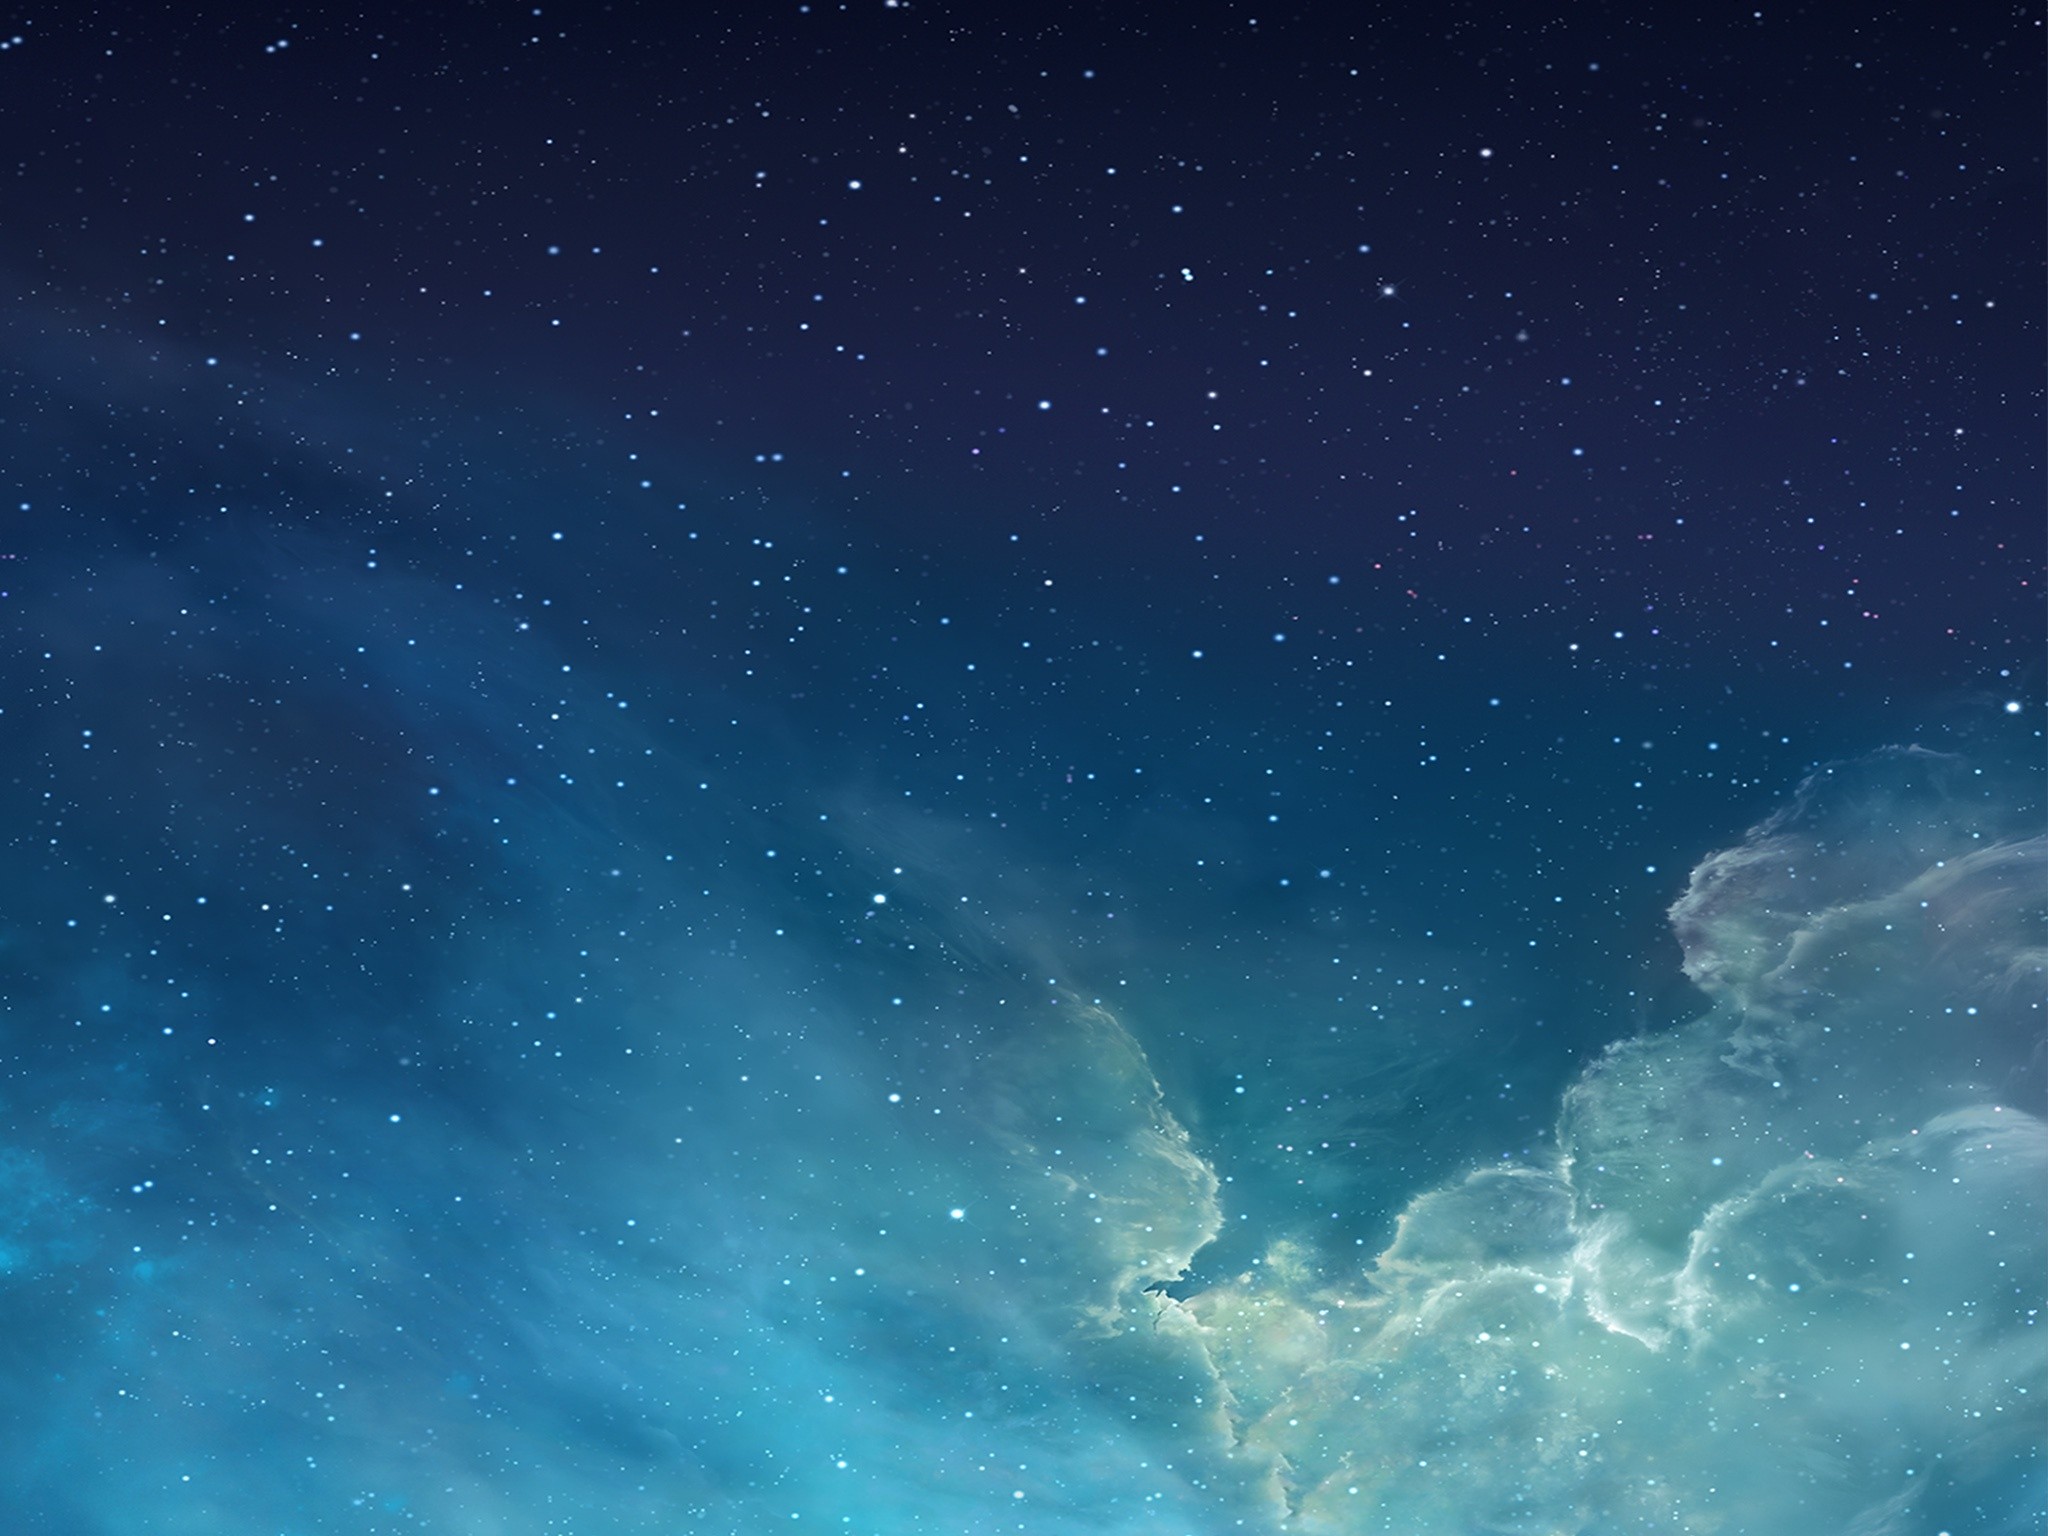 Galaxy Wallpaper For iPad Air Amazing Artwork Background